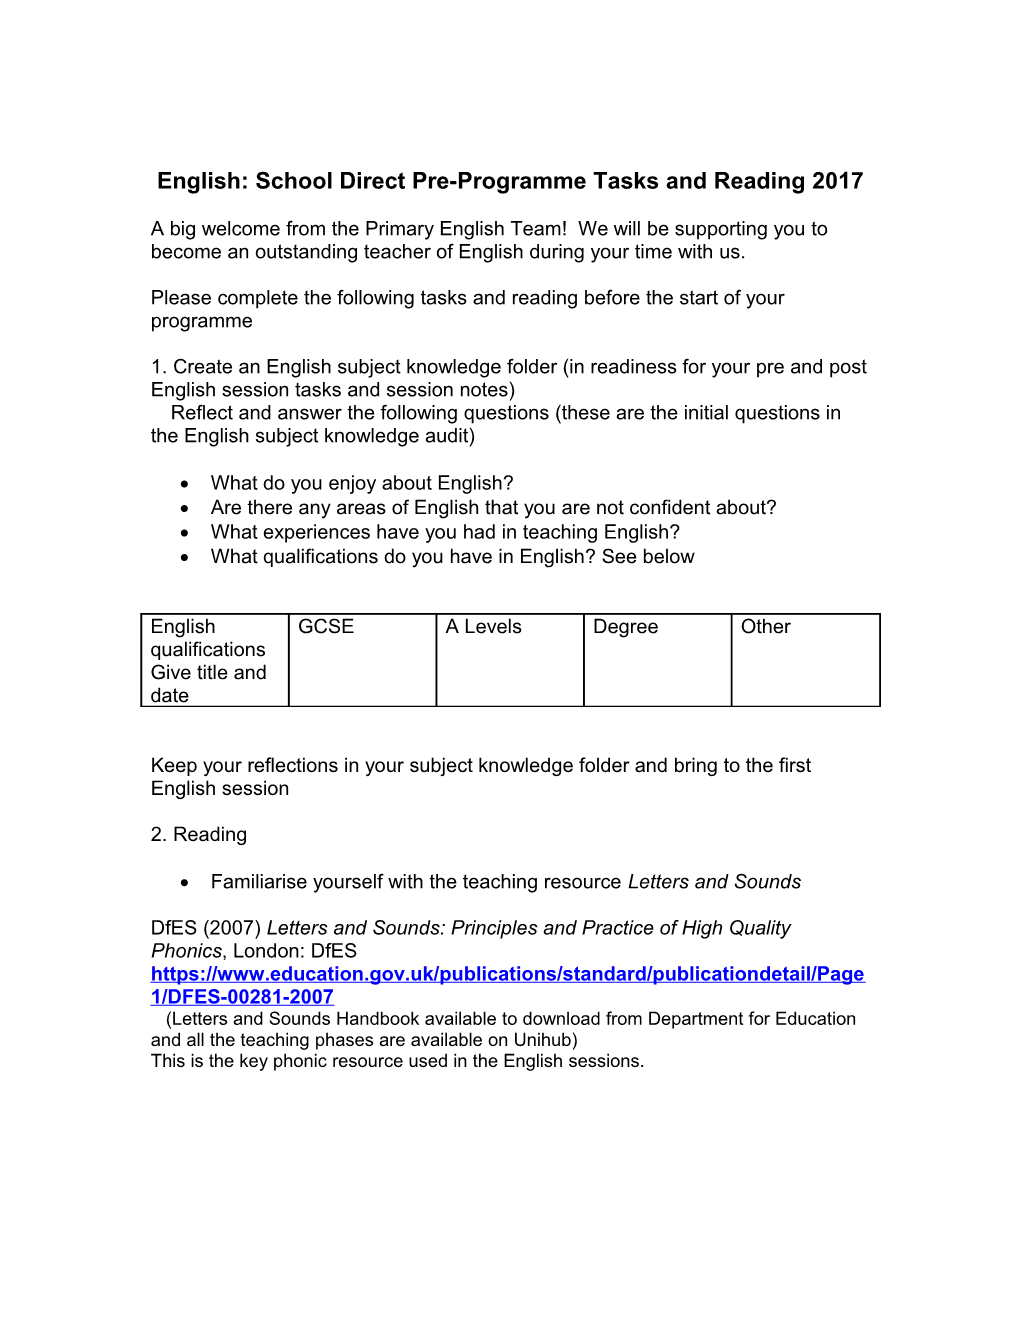 English: School Direct Pre-Programme Tasks and Reading 2017